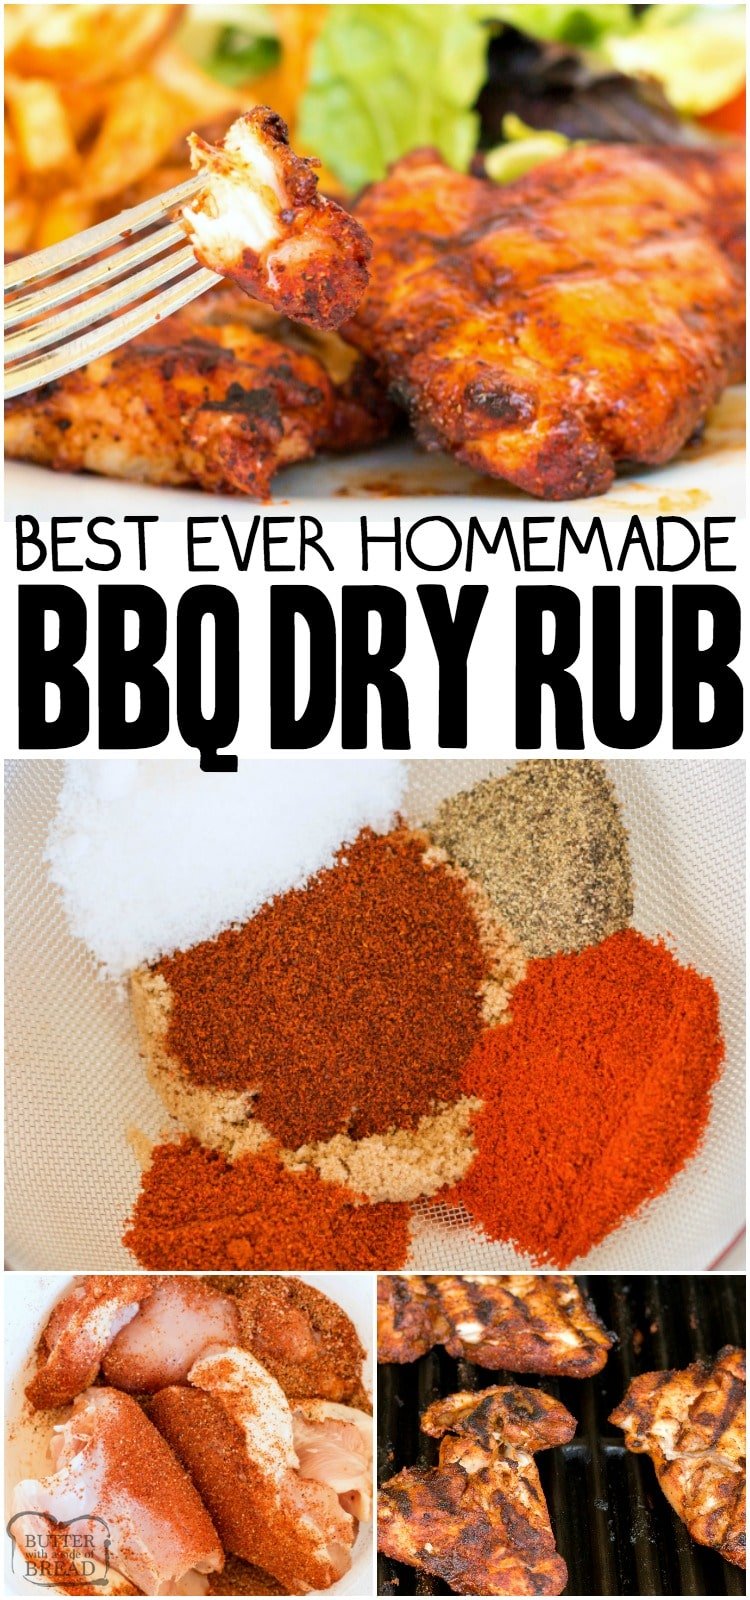 Best BBQ Dry Rub that can be used on chicken, beef, pork and fish.  BBQ rub recipe that is simple to make and adds a great flavor to grilled meats. #bbq #grilling #meat #bbqrub #dryrub #seasoning #recipe from BUTTER WITH A SIDE OF BREAD